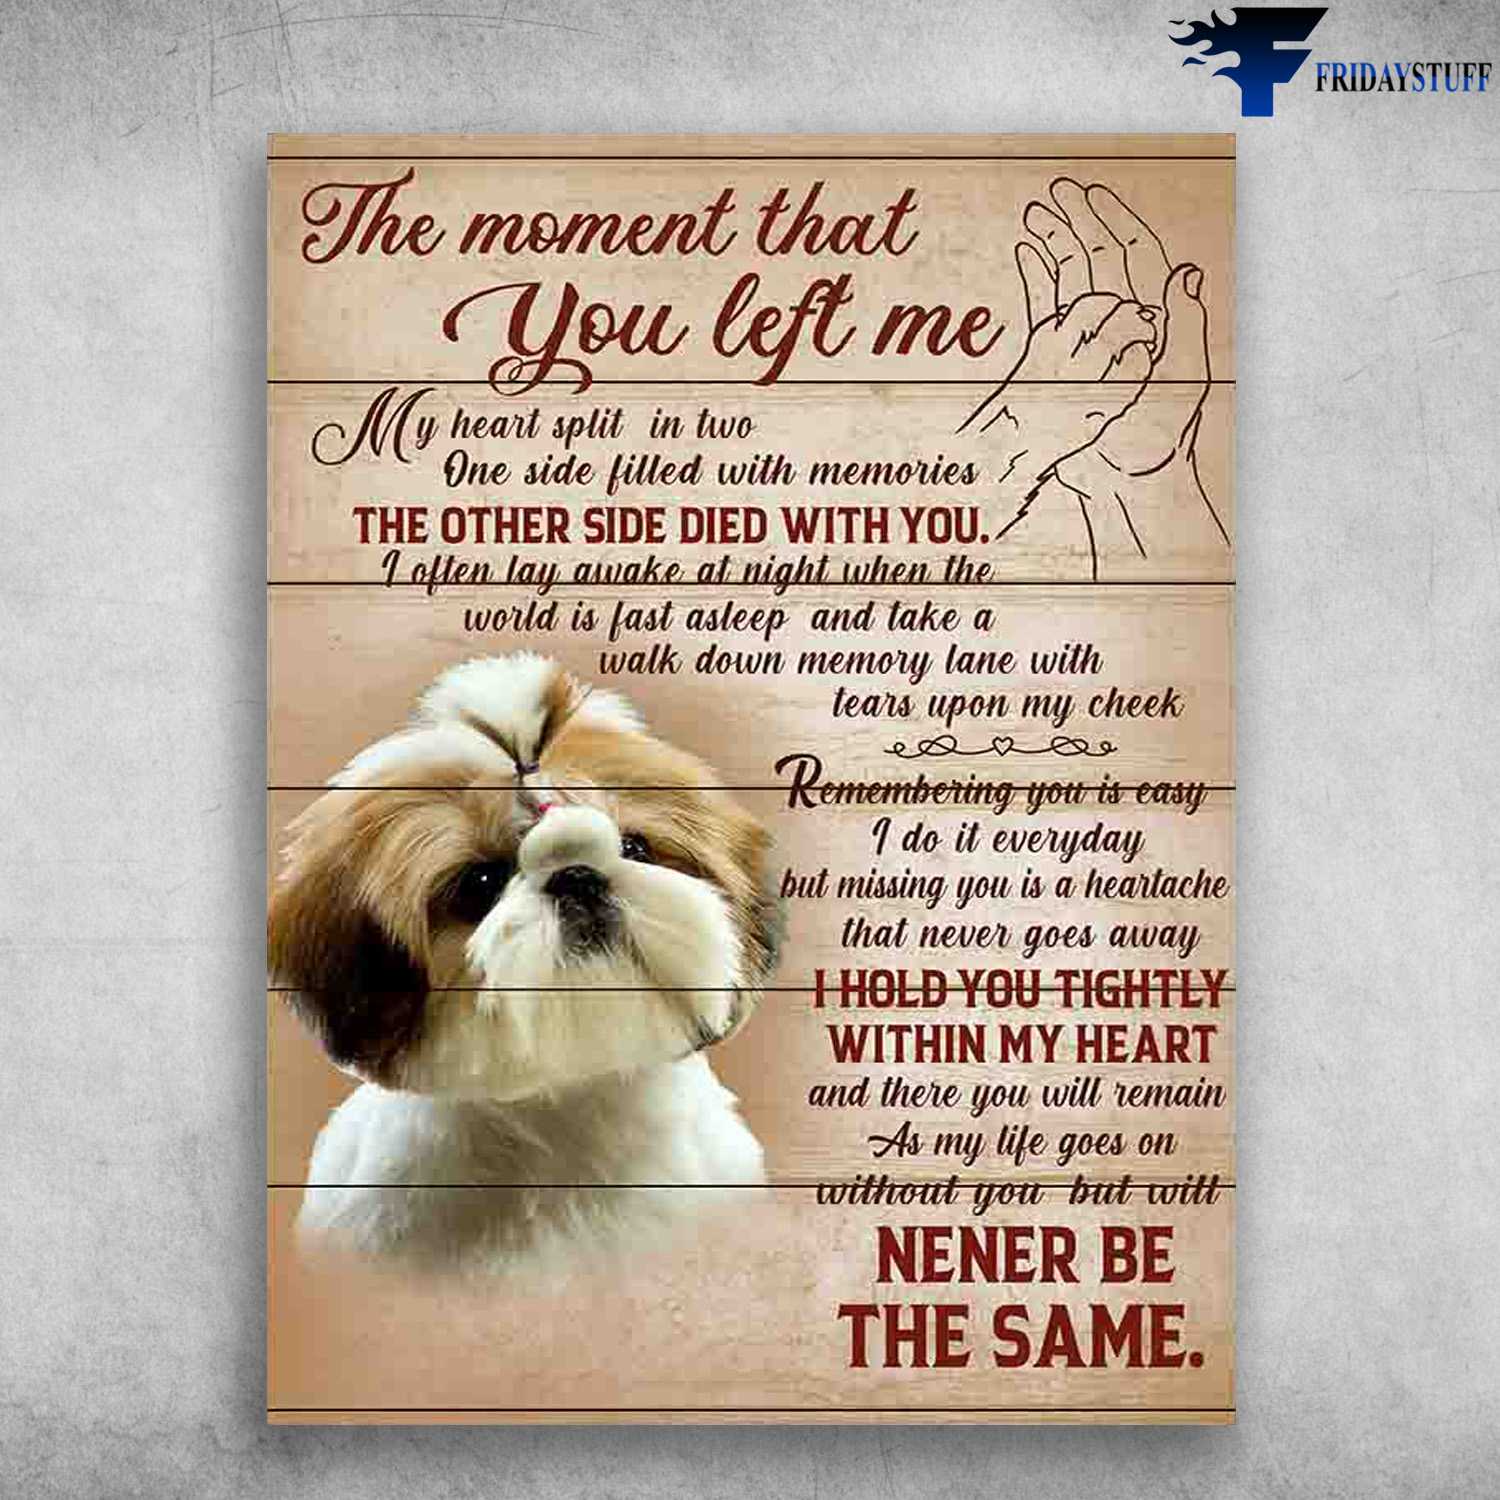 Shih Tzu Dog, Dog Lover - The Moment That You Left Me, My Heart Split In Two, One Side Filled With Memories, The Other Side Died With You